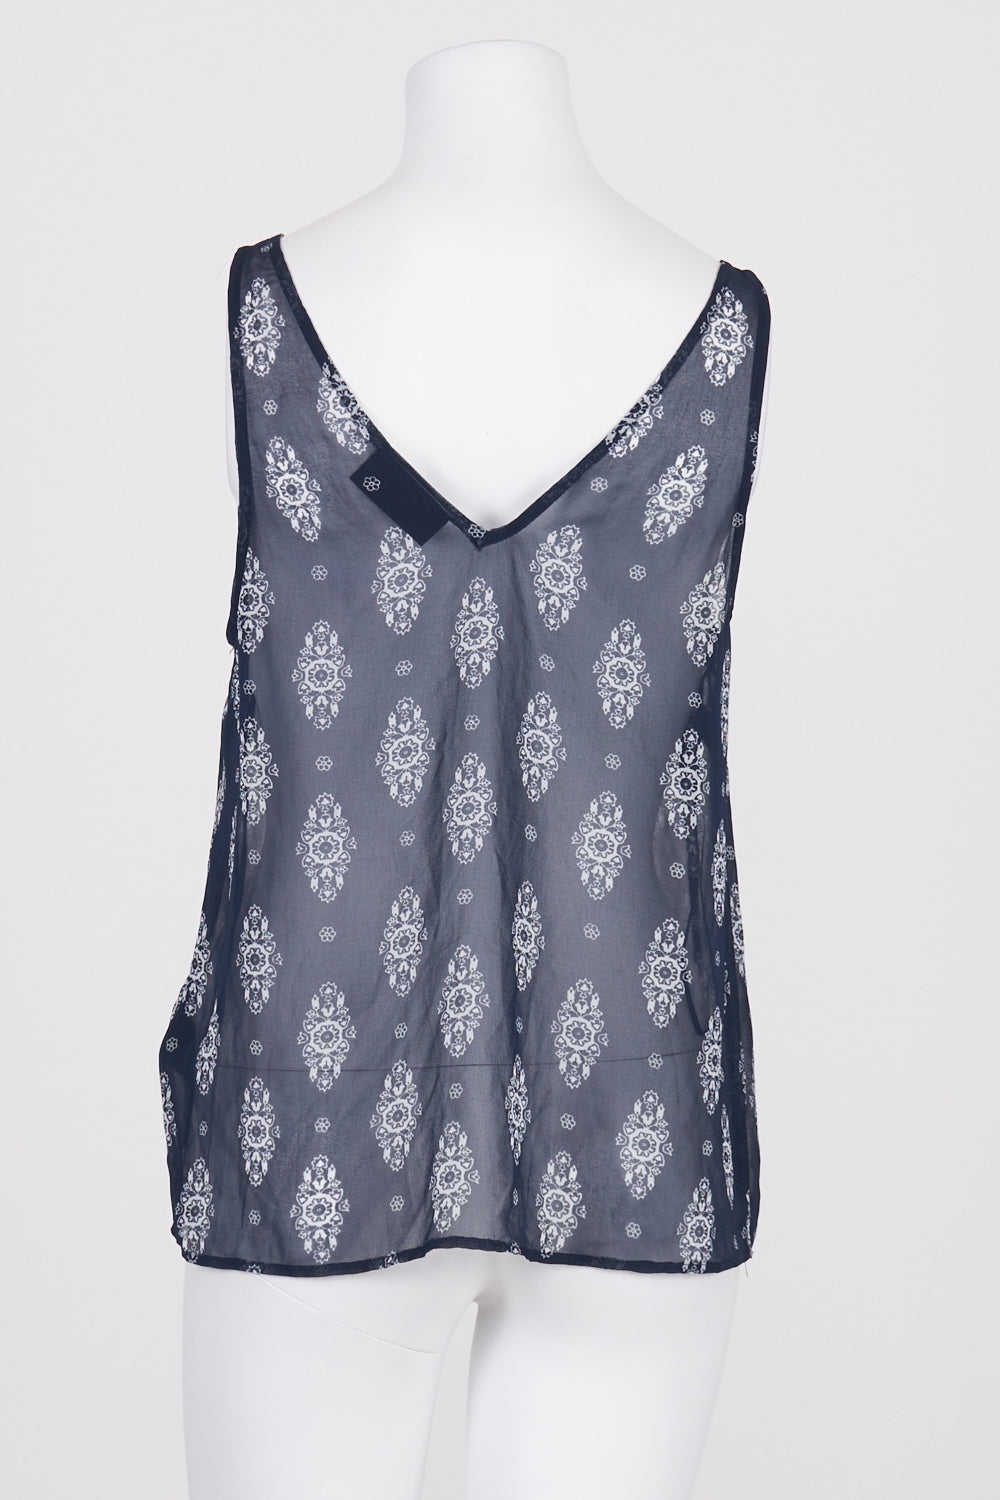 The Fifth Label Navy Patterned Sheer Top S